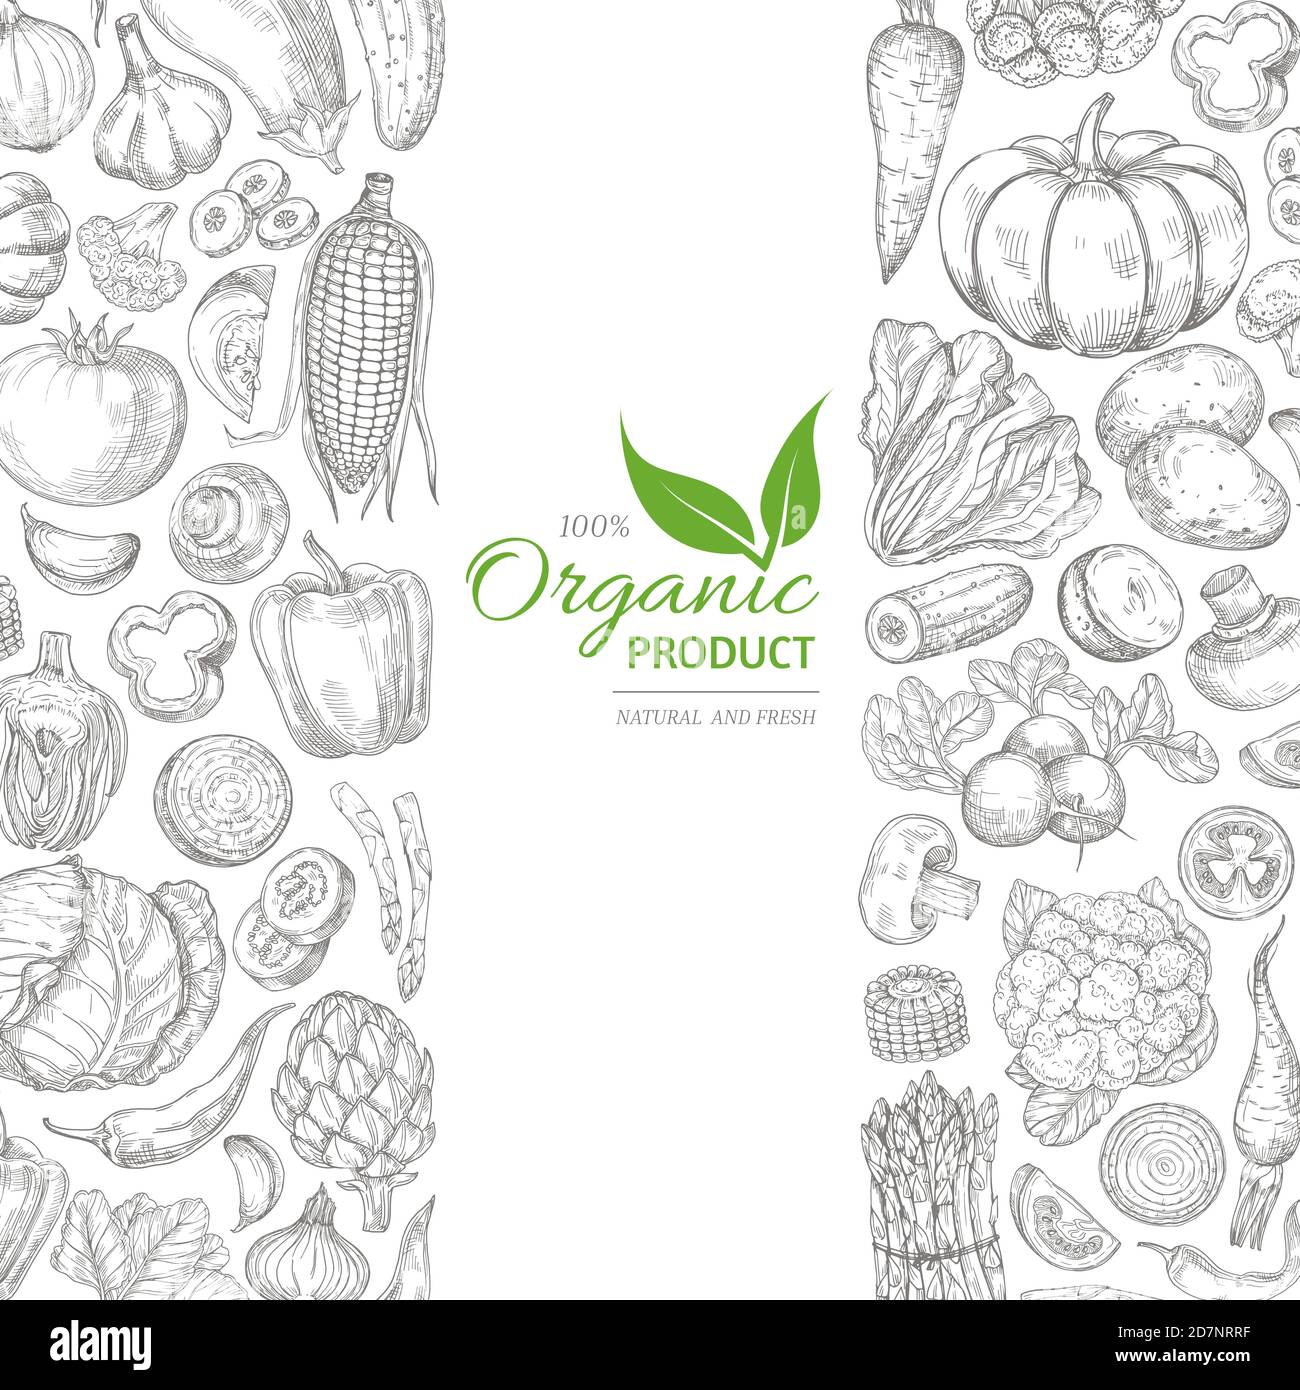 Organic sketch fresh vegetables vector retro background with hand drawn doodle greens on white Stock Vector